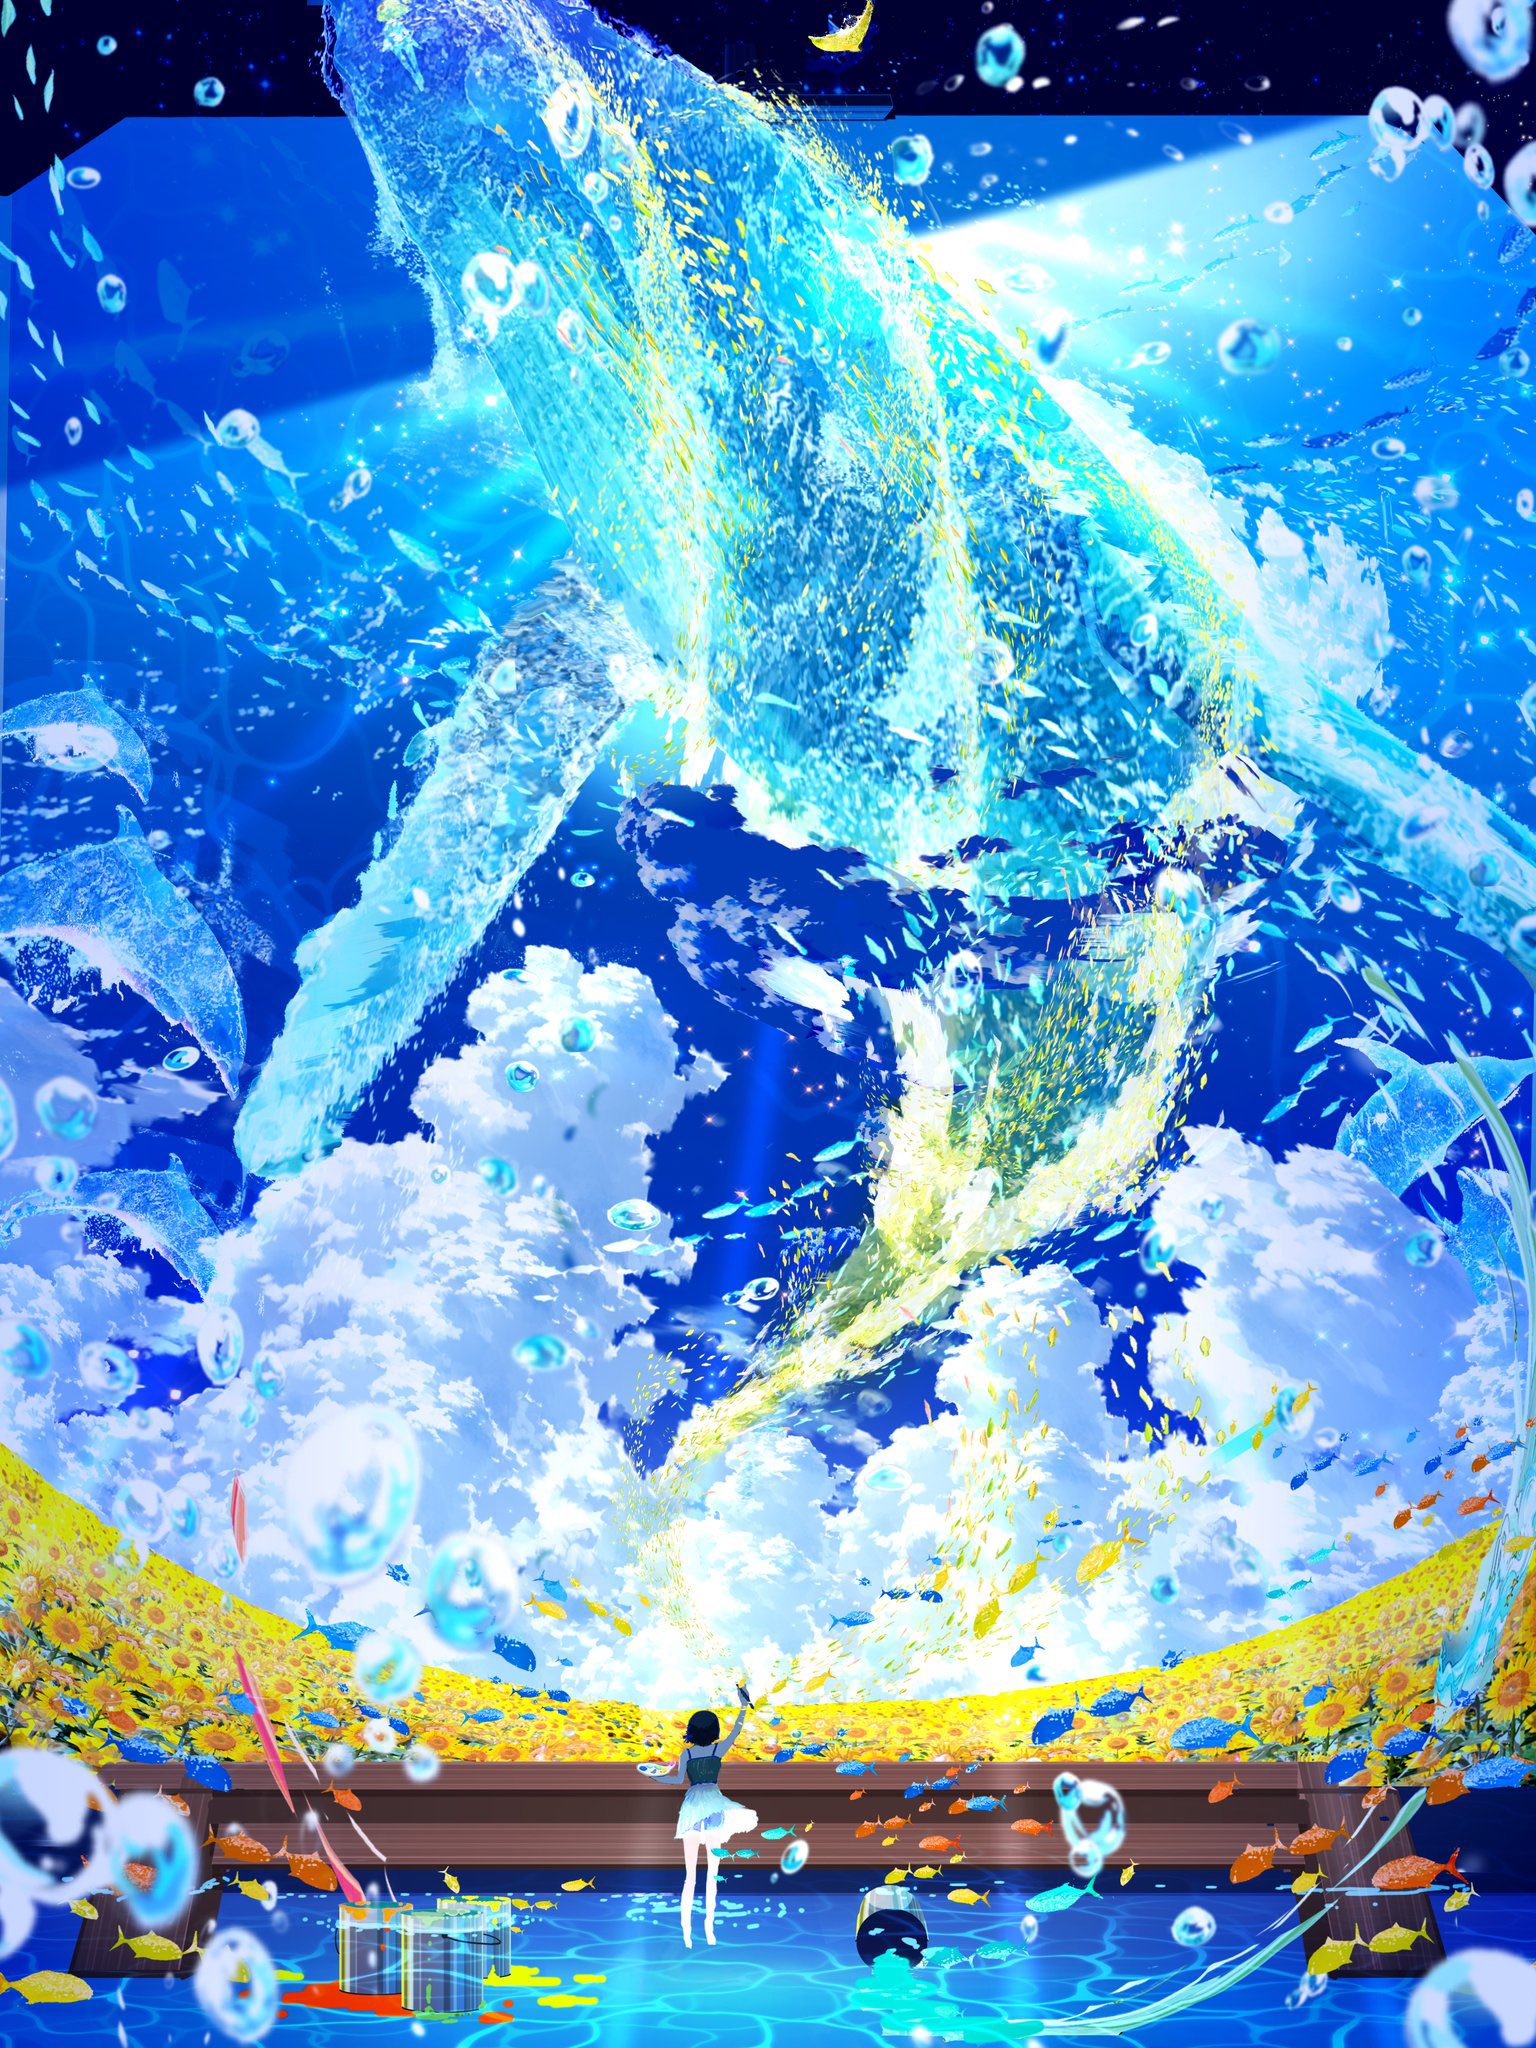 Anime 1536x2048 anime anime girls portrait display whale animals standing paint brushes painting water water drops fish sunflowers sunlight flying whales